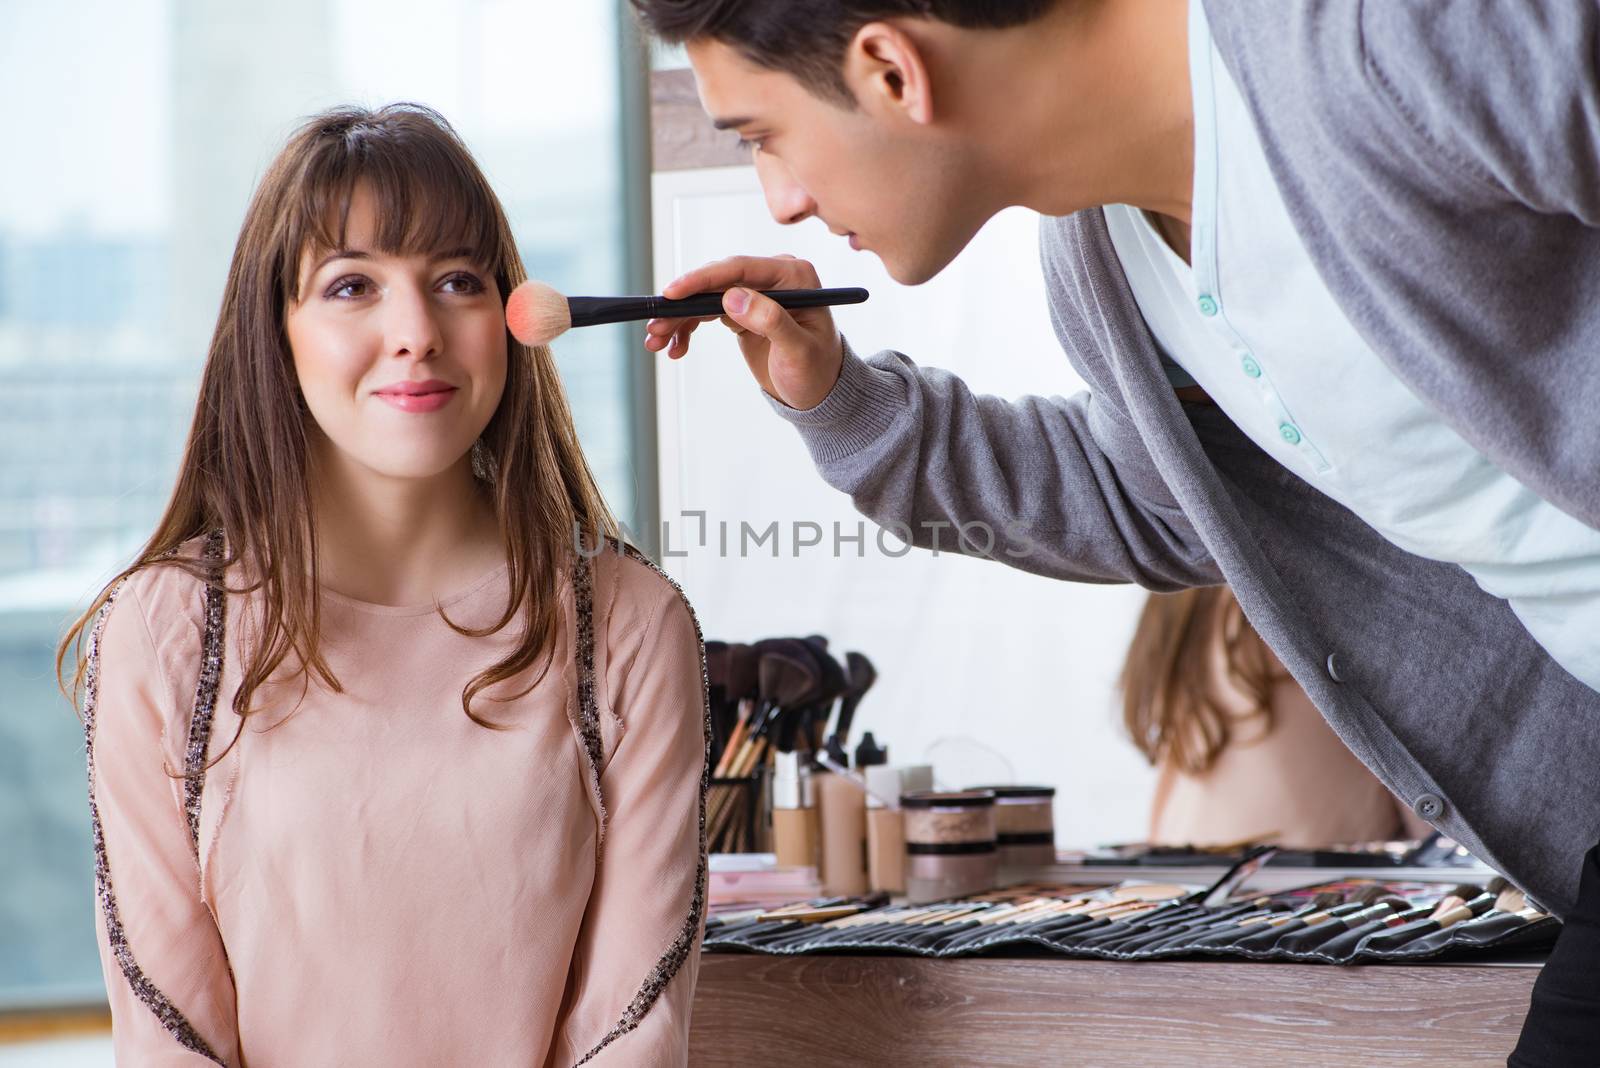 Man doing make-up for cute woman in beauty salon by Elnur